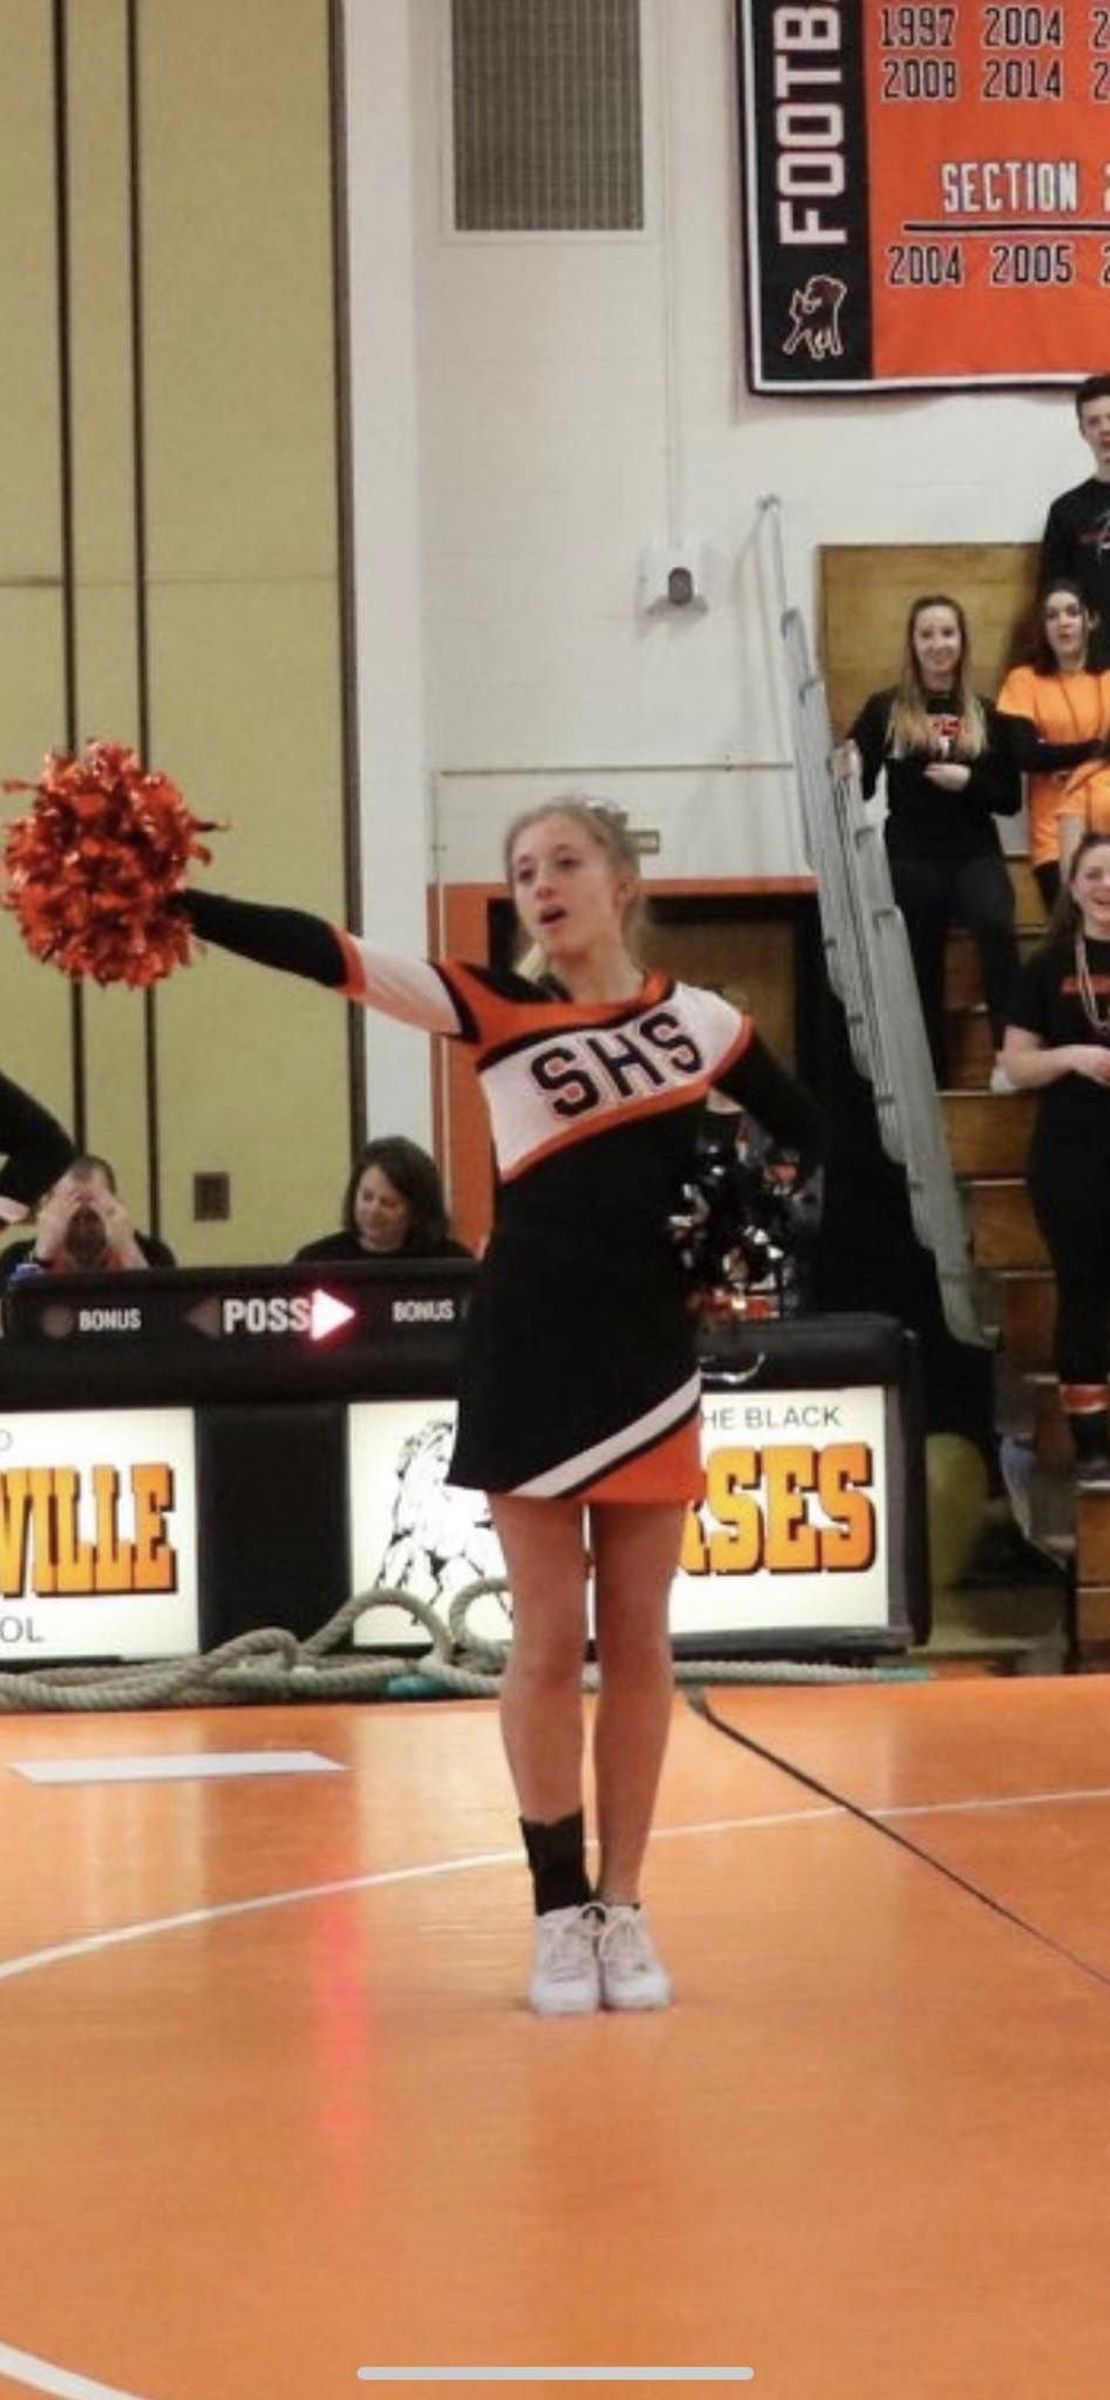 Kaylin Gillis graduated from Schuylerville High School in 2021 and held the position of "flyer" on the school's cheerleading team.